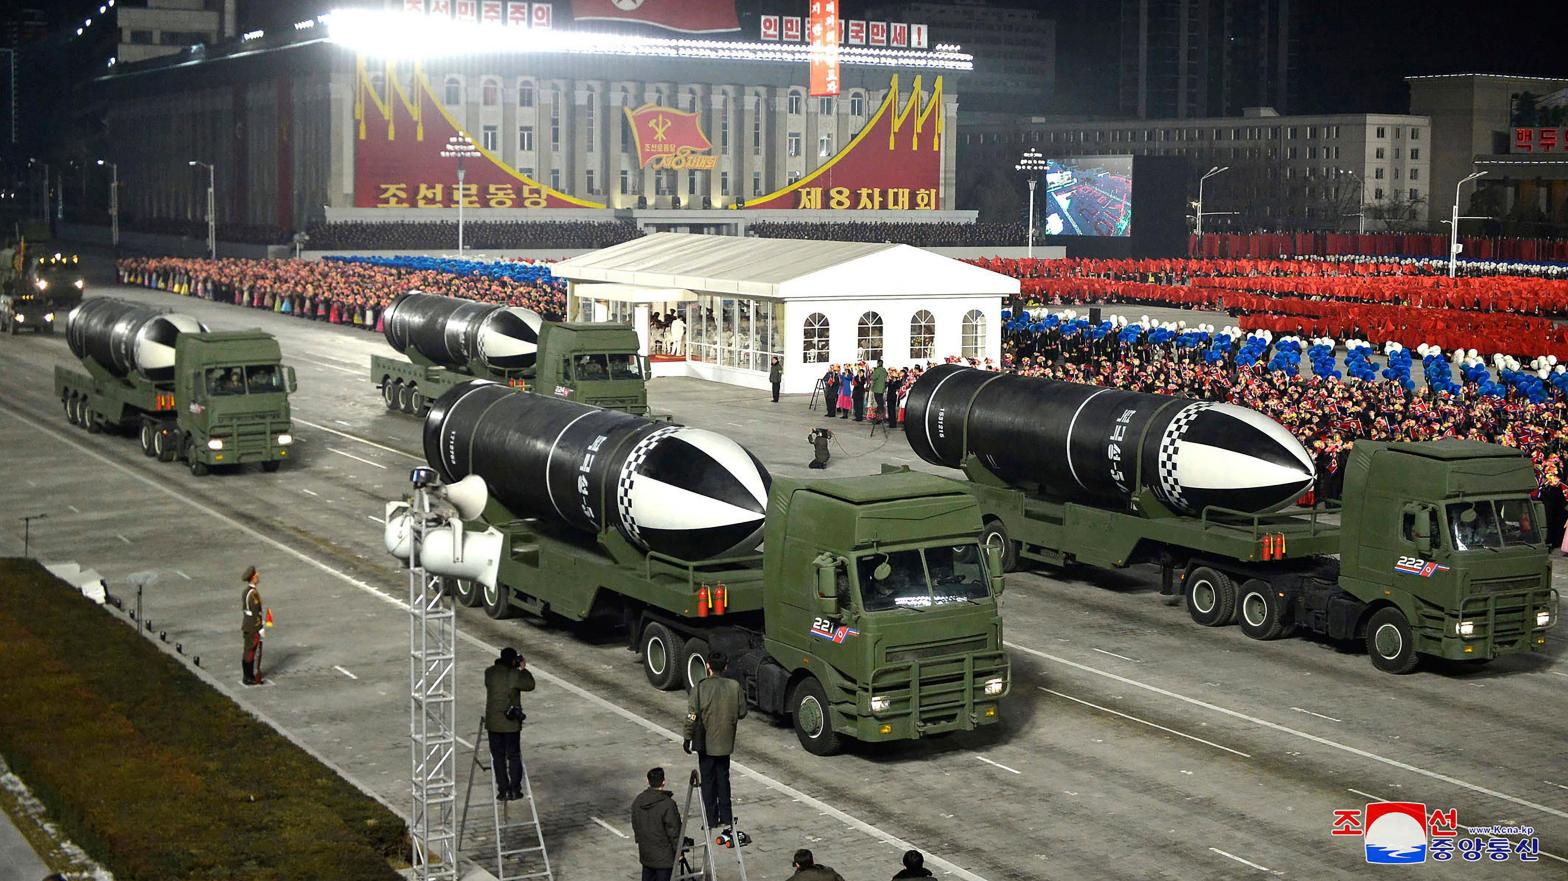 This photo provided by the North Korean government shows missiles during a military parade marking the ruling party congress, at Kim Il Sung Square in Pyongyang, North Korea on Jan. 14, 2021. (Photo: Korean Central News Agency/Korea News Service, AP)